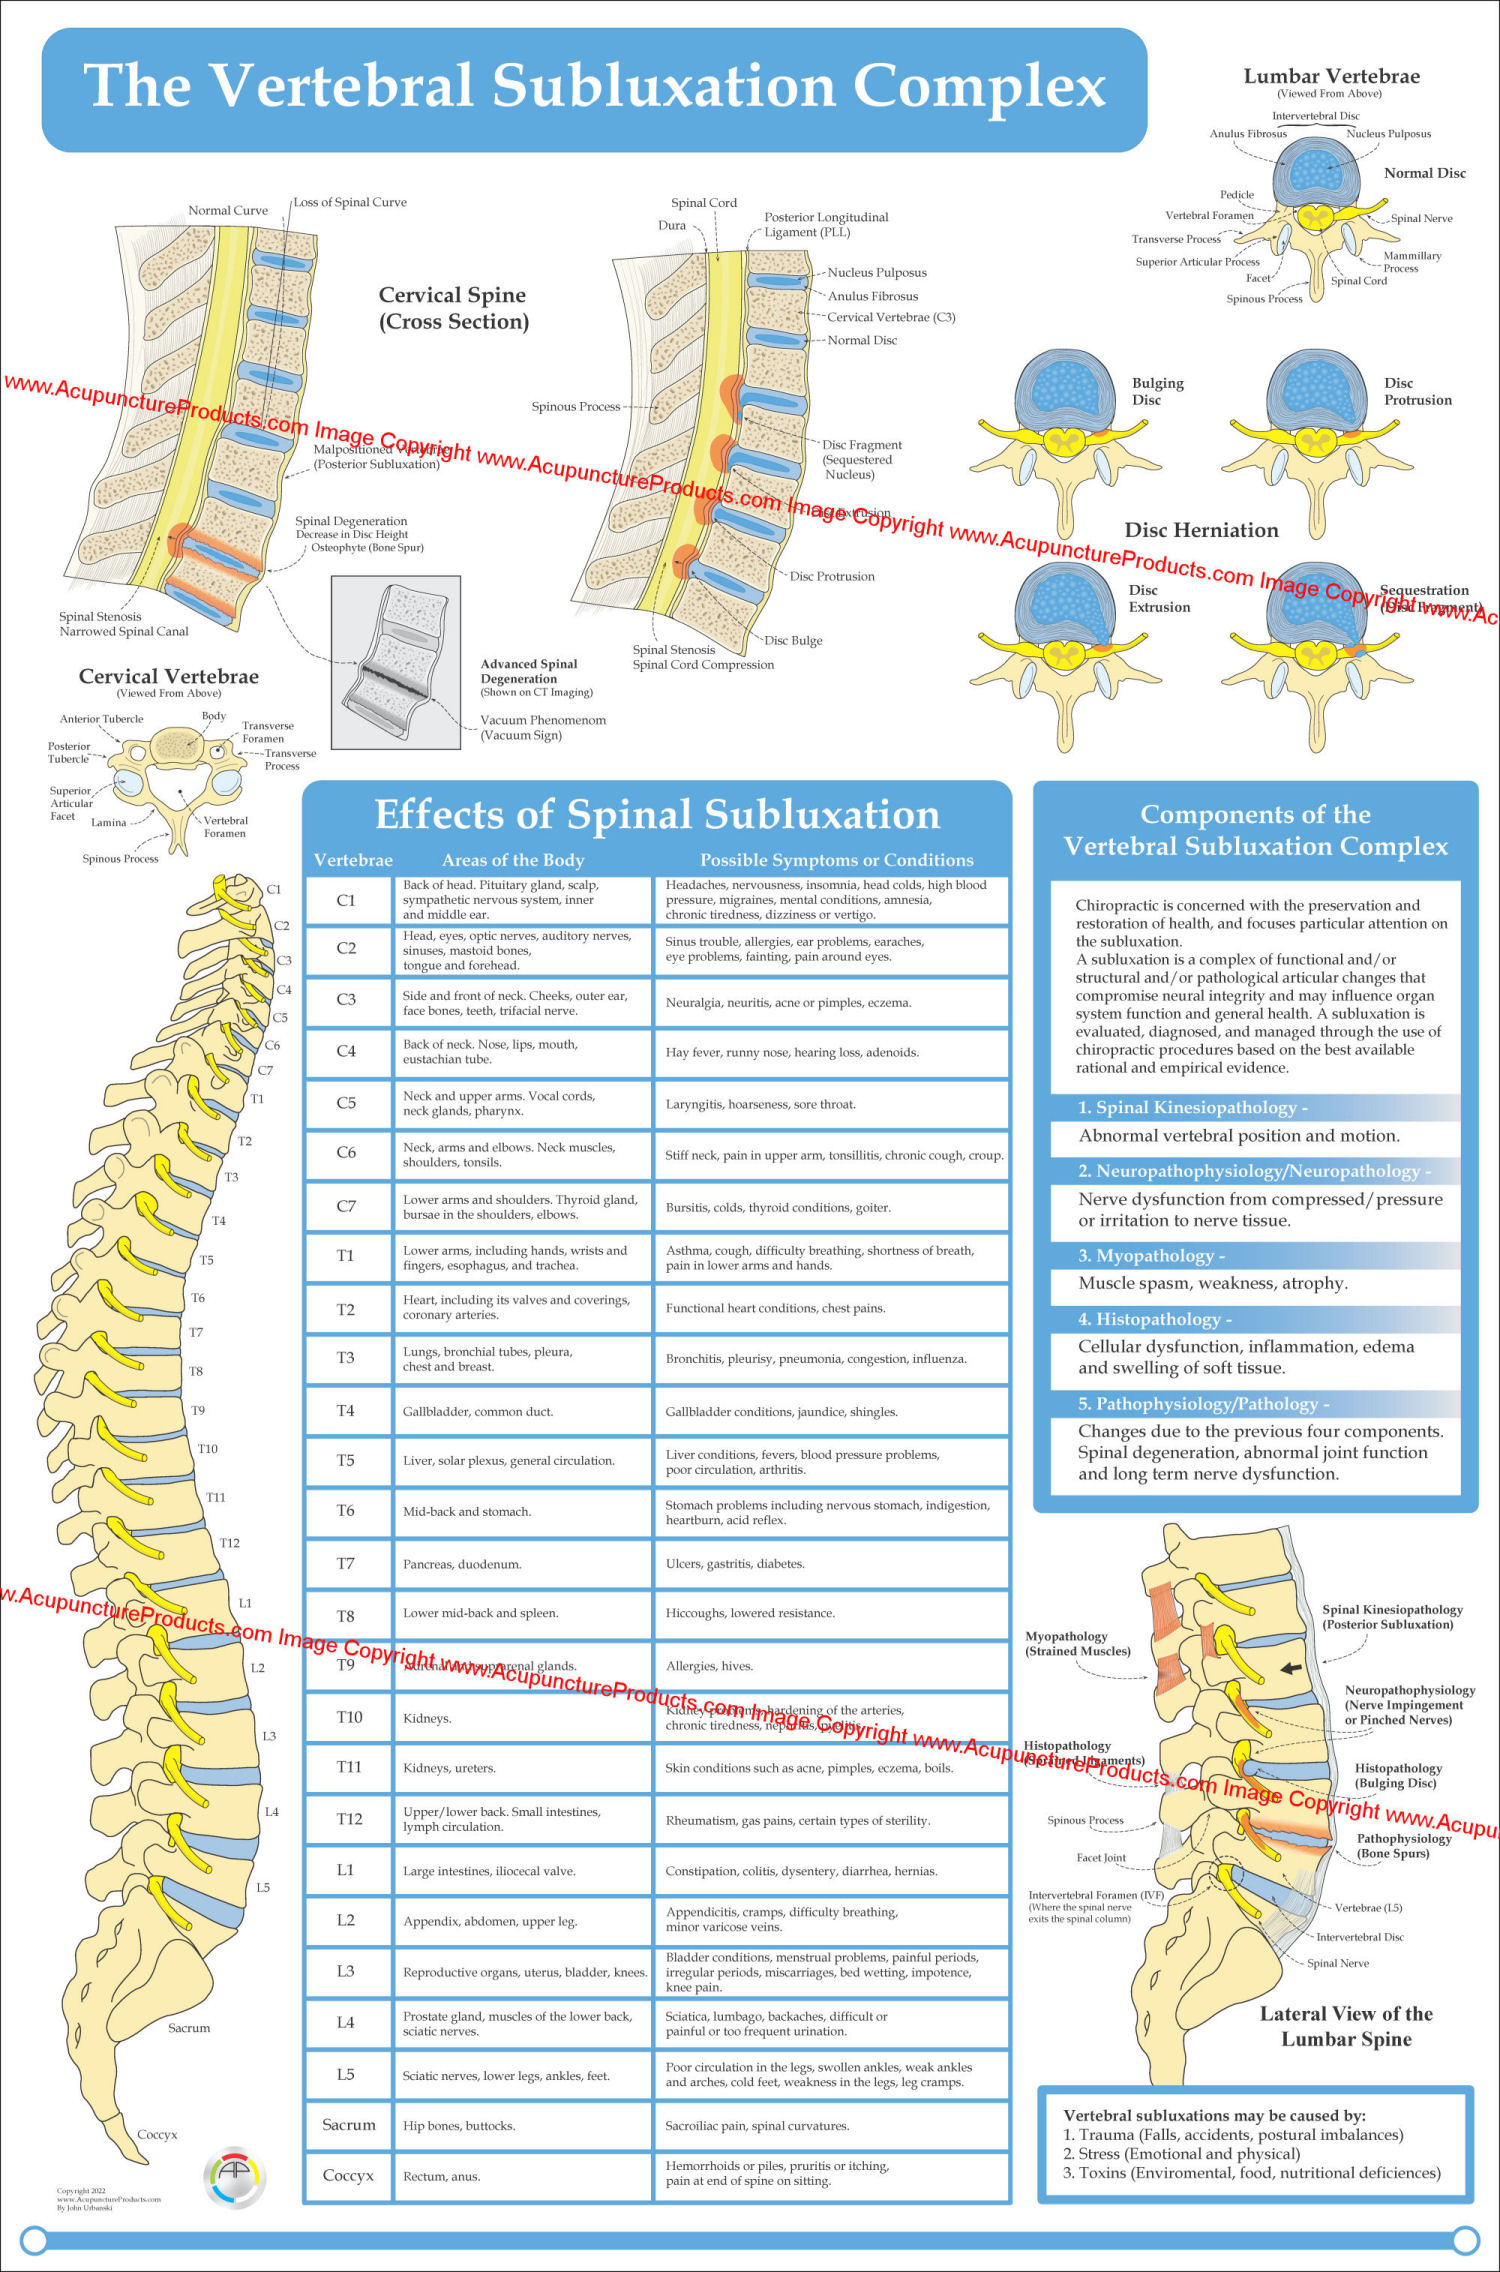 Chiropractic Spinal Nerves And Vertebral Subluxation Poster X My Xxx Hot Girl